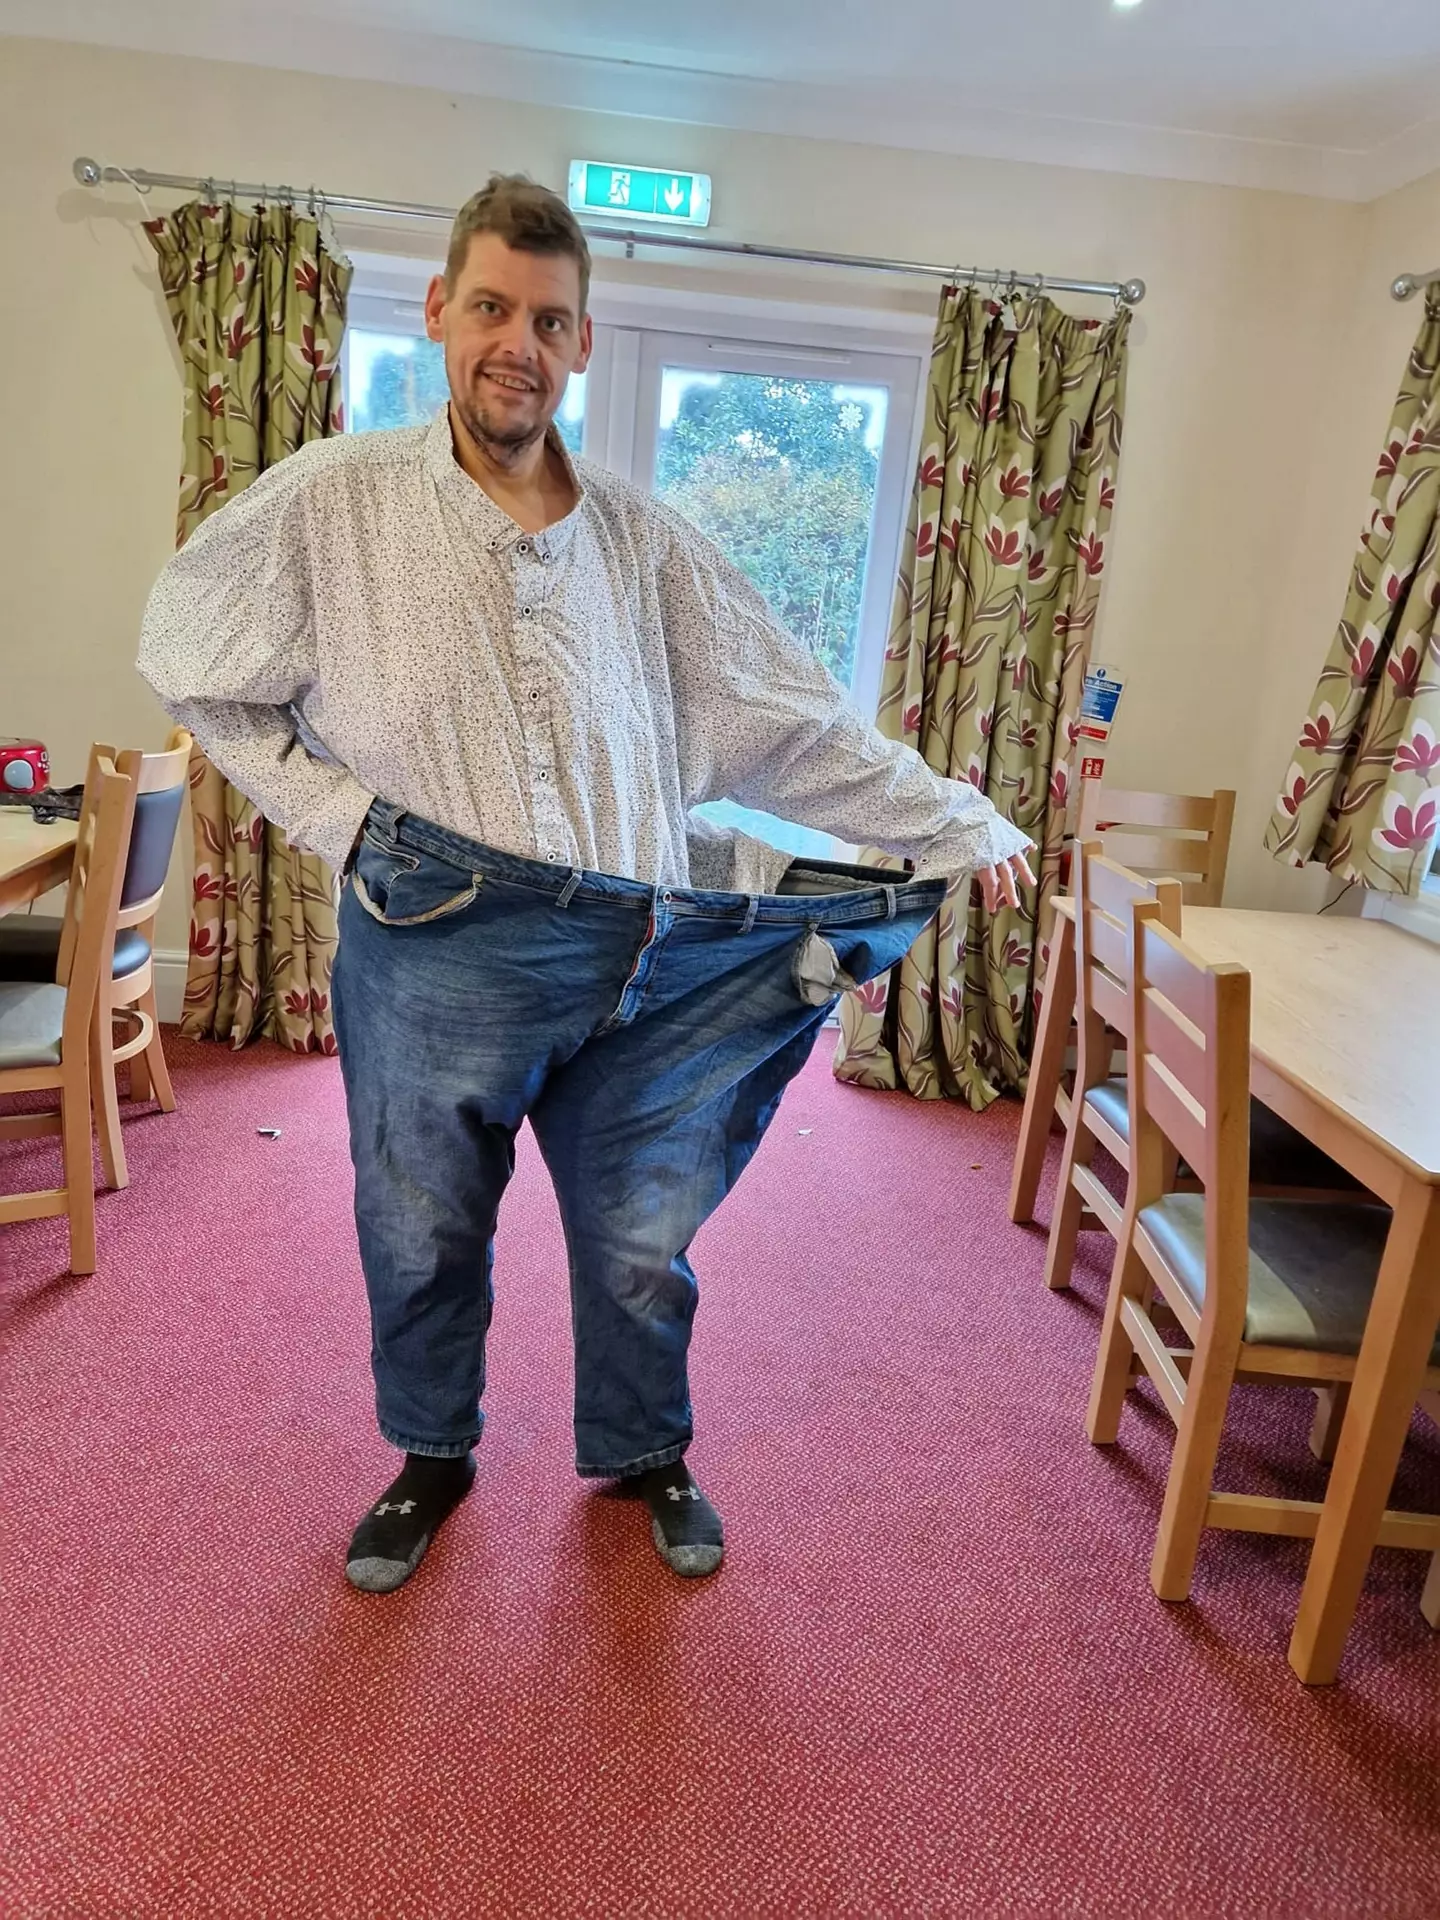 Ashley showing just how much weight he's lost compared to the clothes he would normally buy.